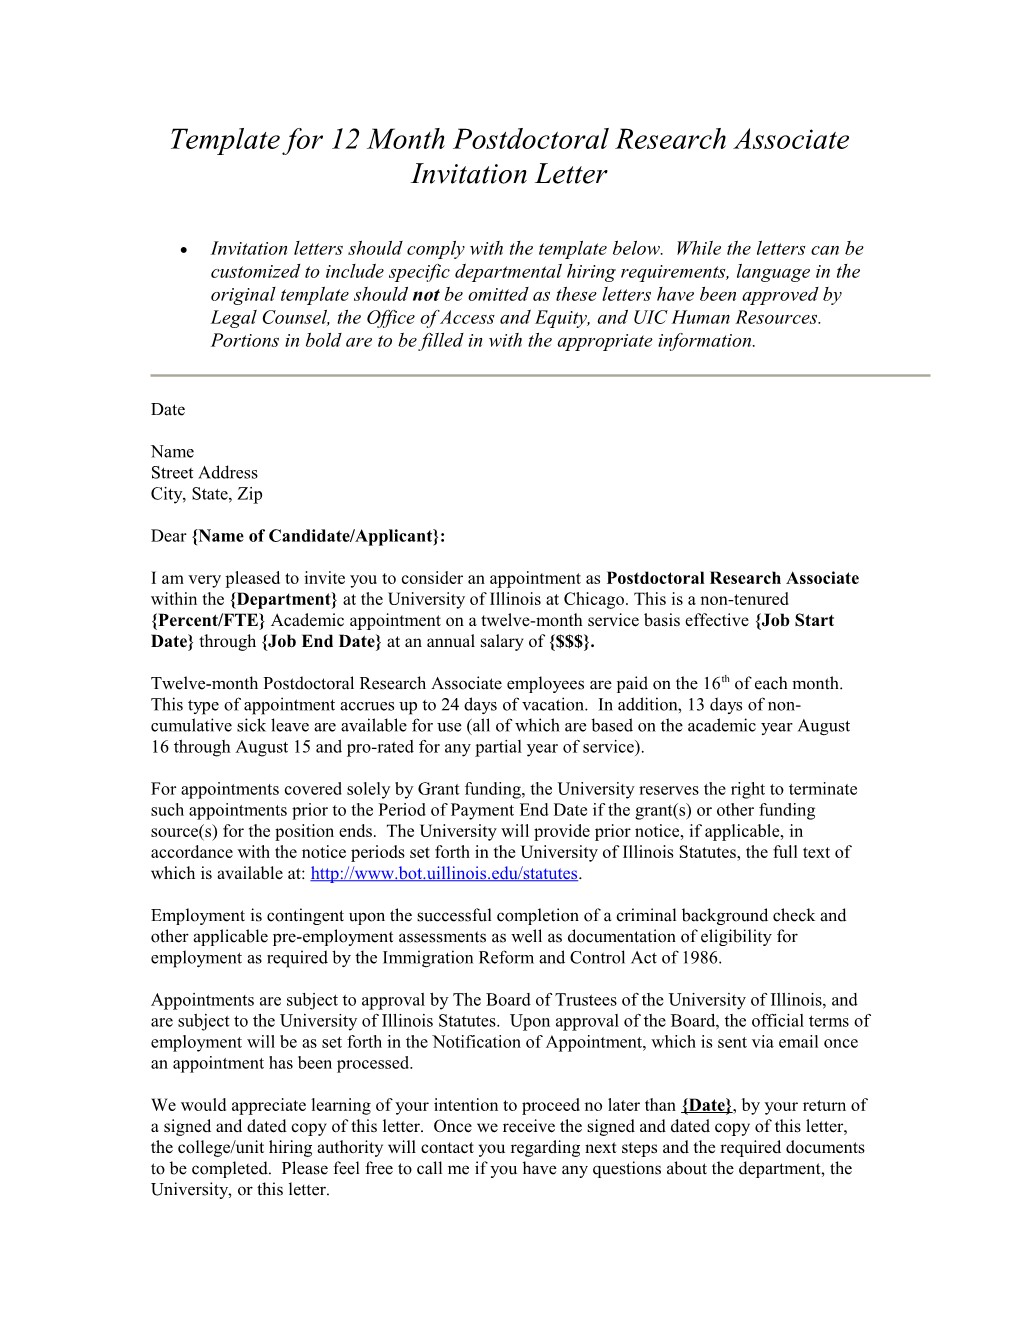 Template for 12 Month Postdoctoral Research Associateinvitation Letter